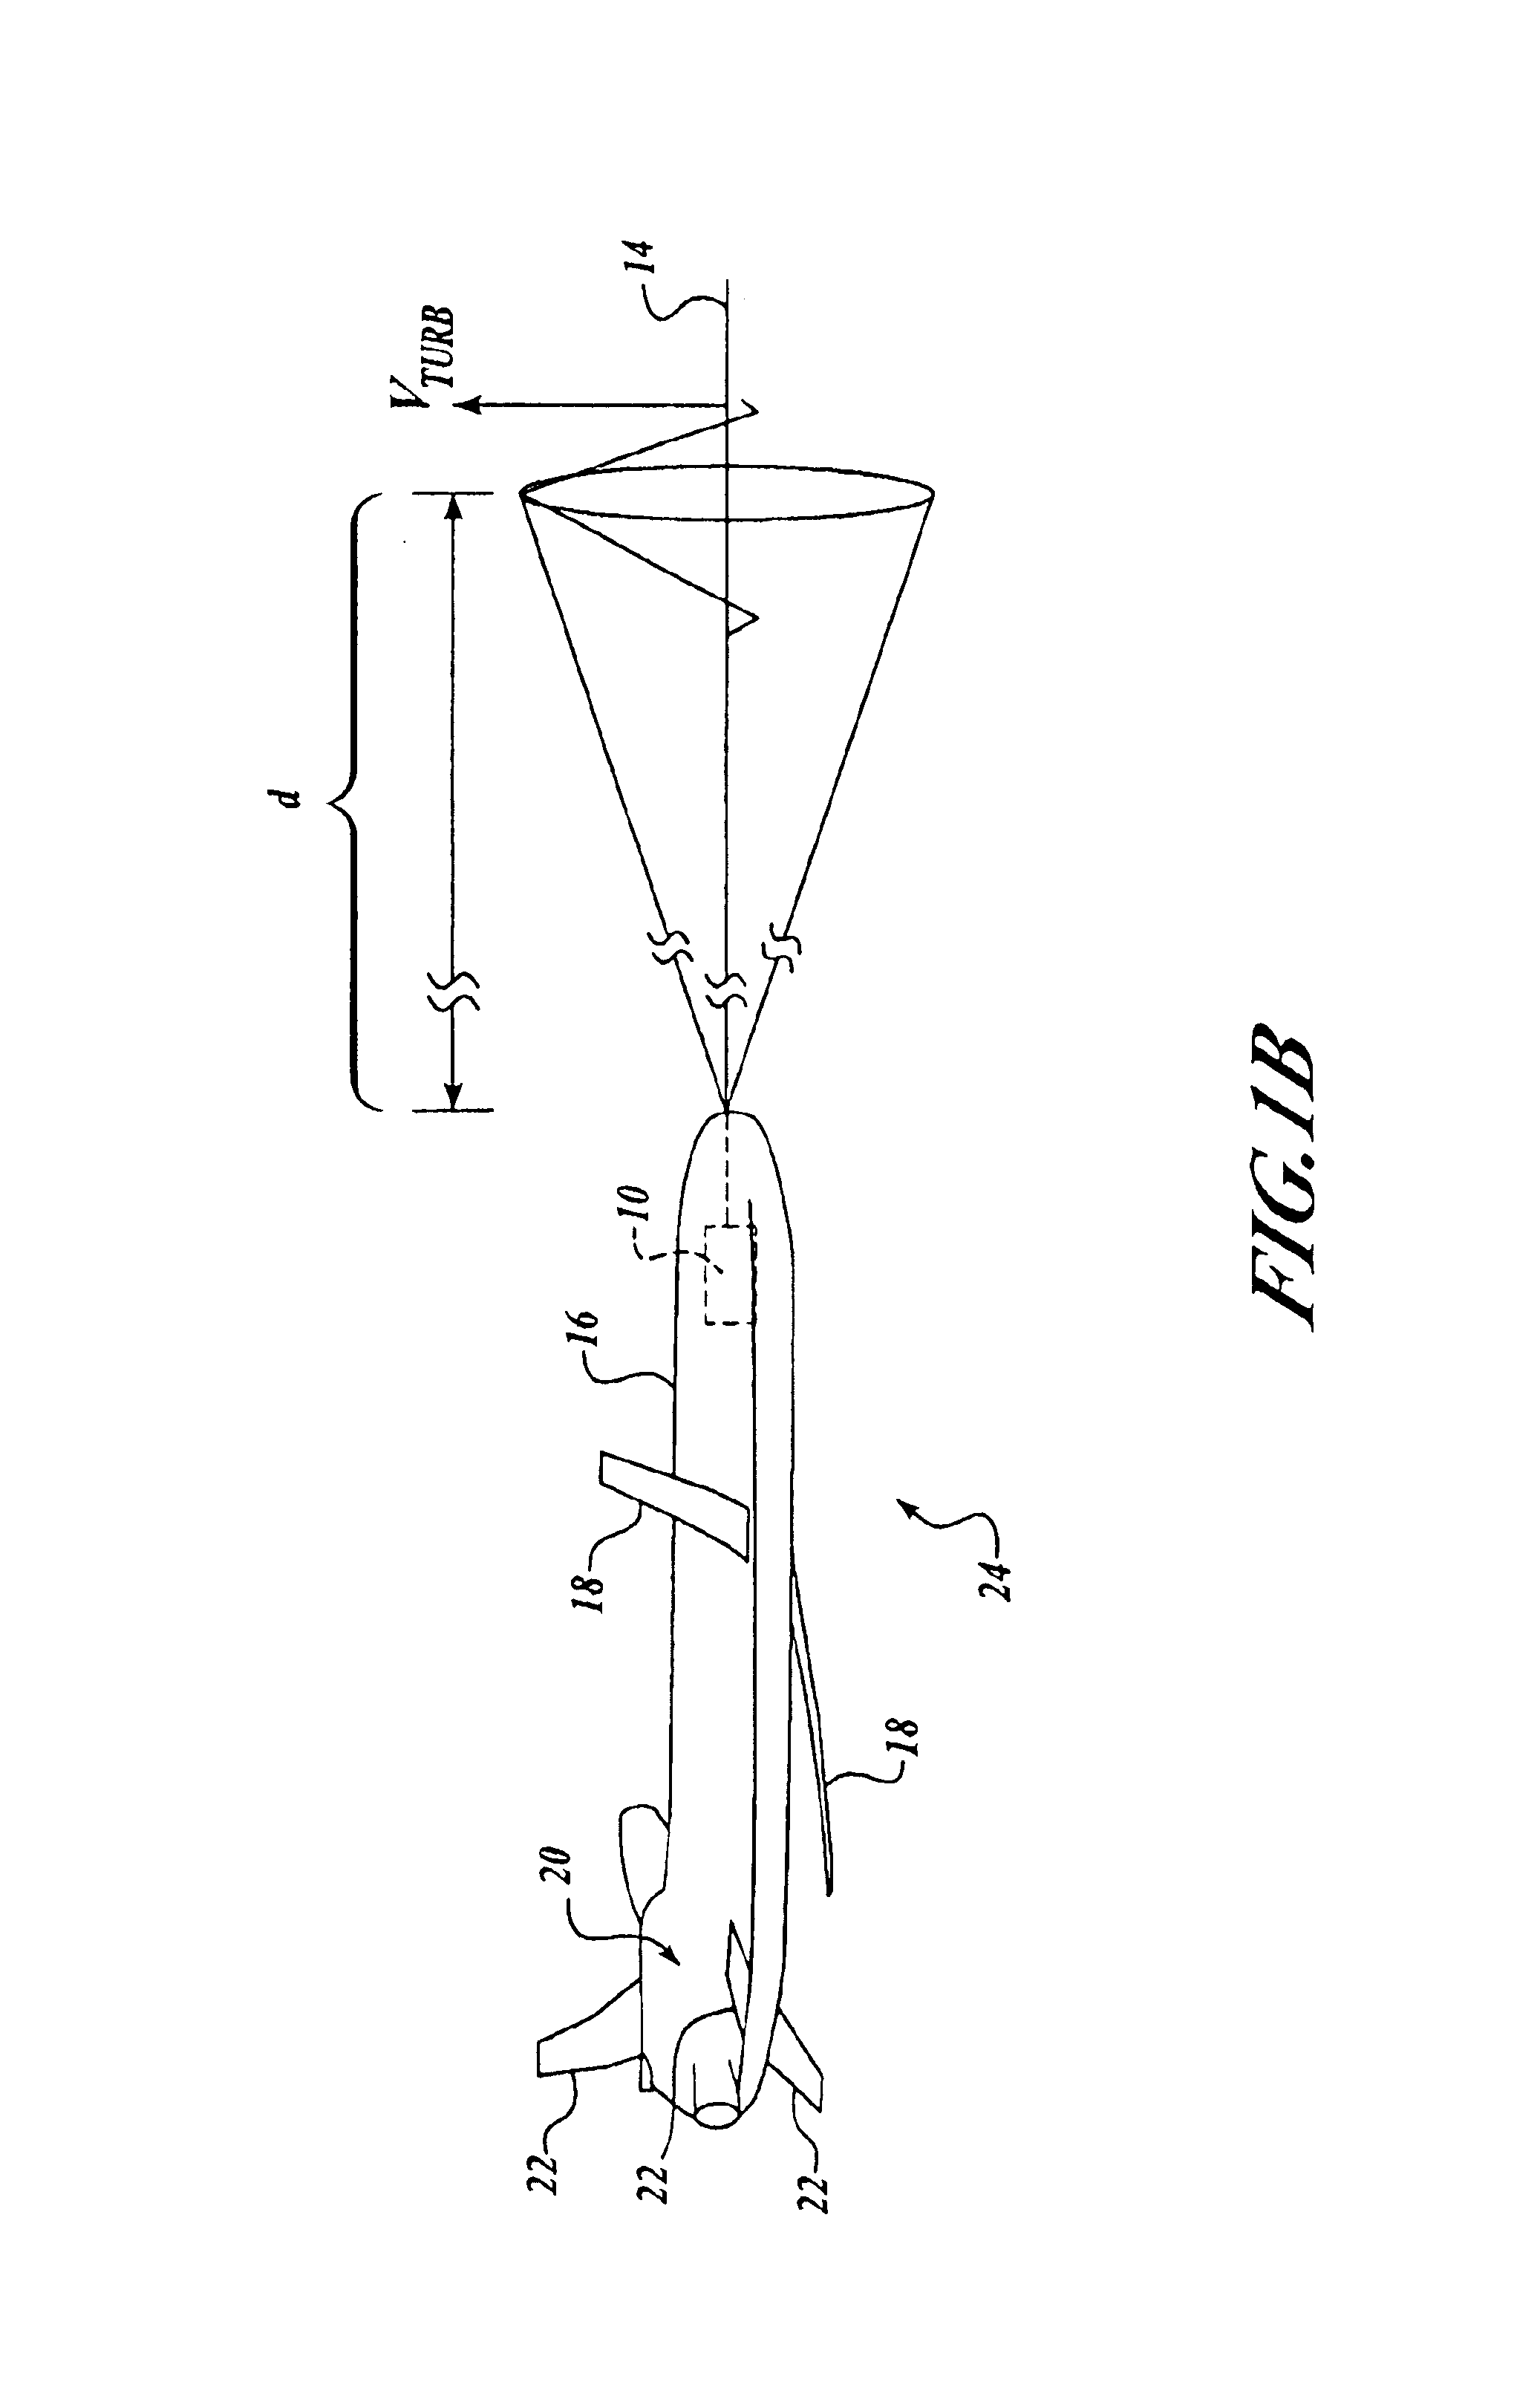 Proactive optical trajectory following system